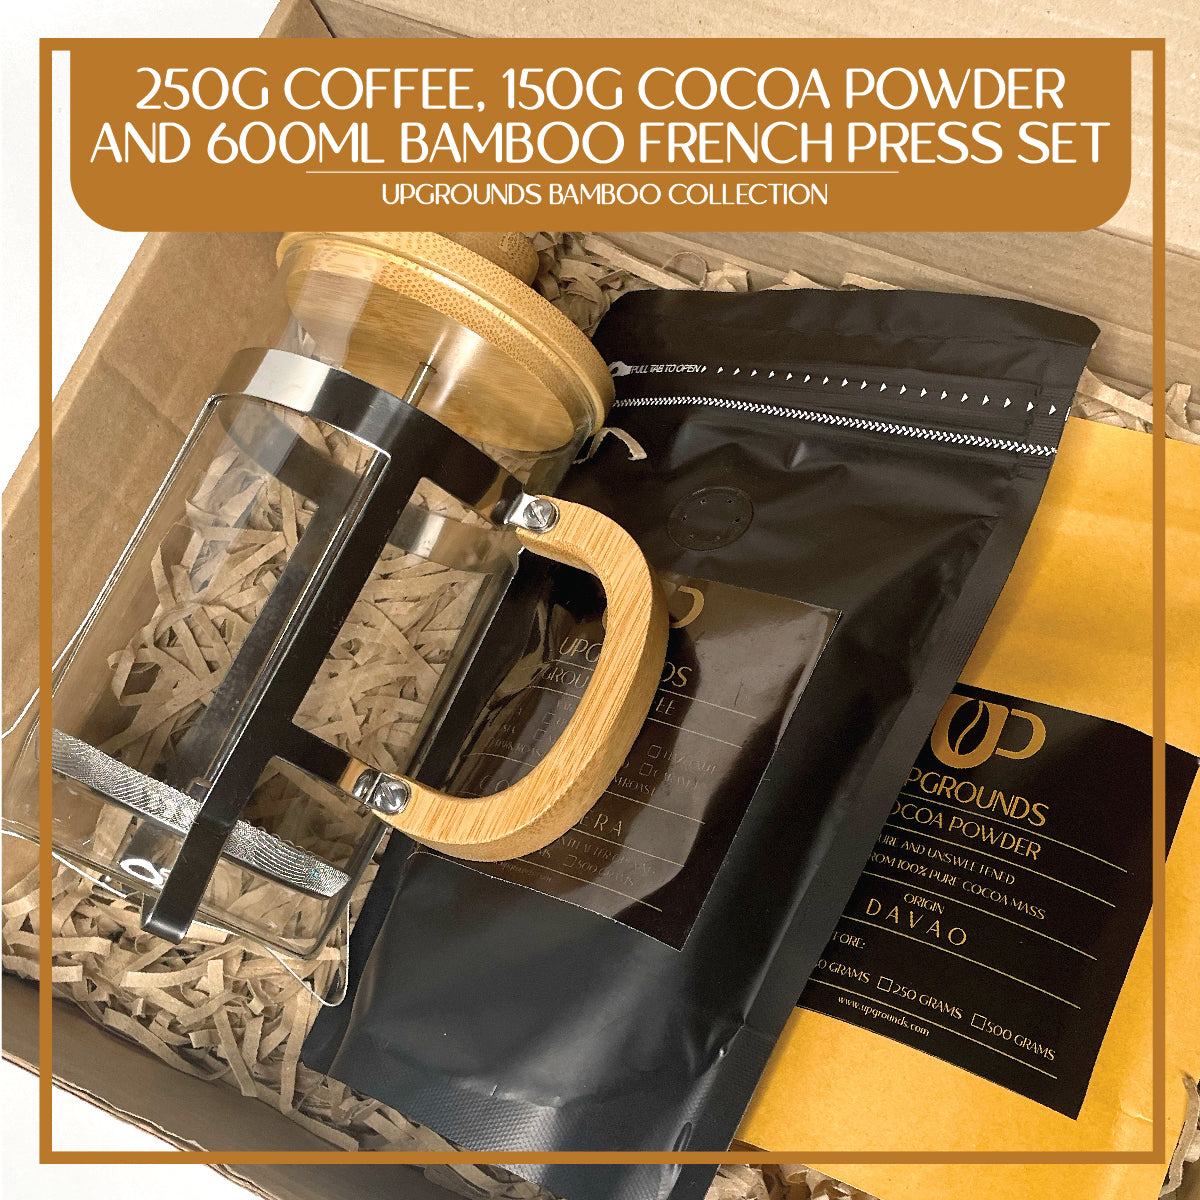 250g Coffee, 150g Cocoa Powder and Bamboo French Press Set | Upgrounds